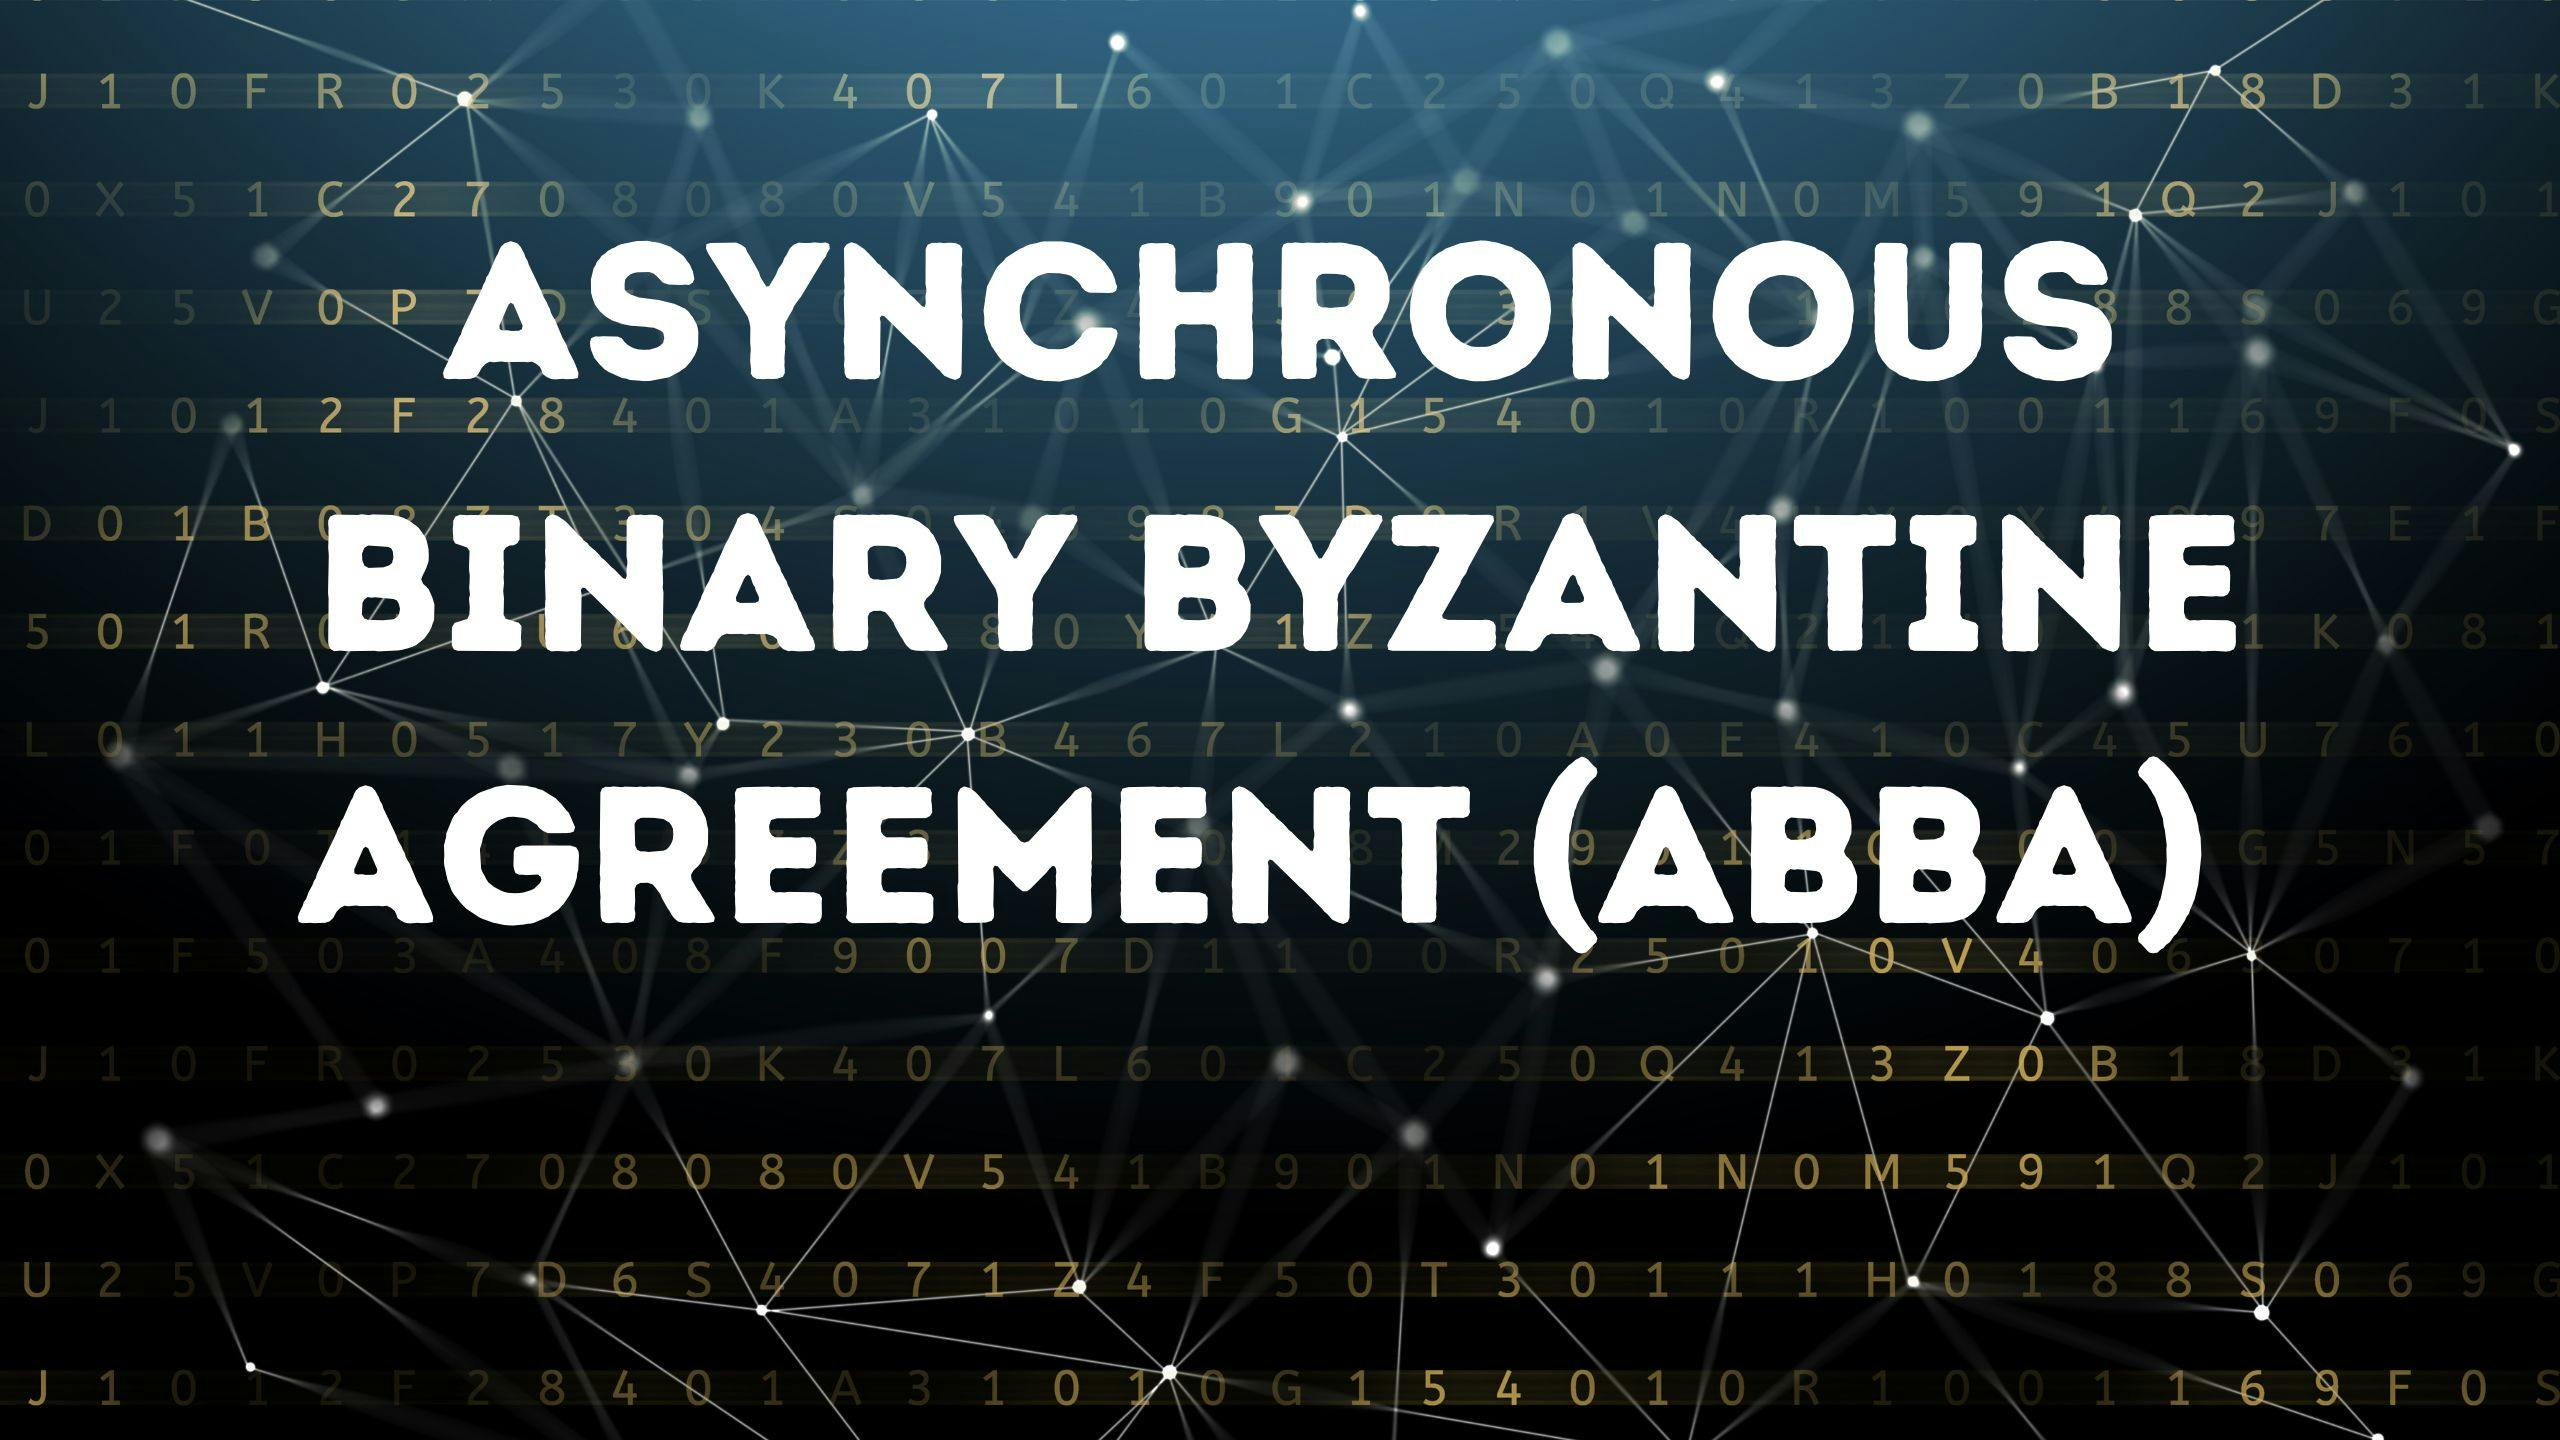 featured image - Analyzing Asynchronous Binary Byzantine Agreement (ABBA) Consensus on SKALE Blockchain